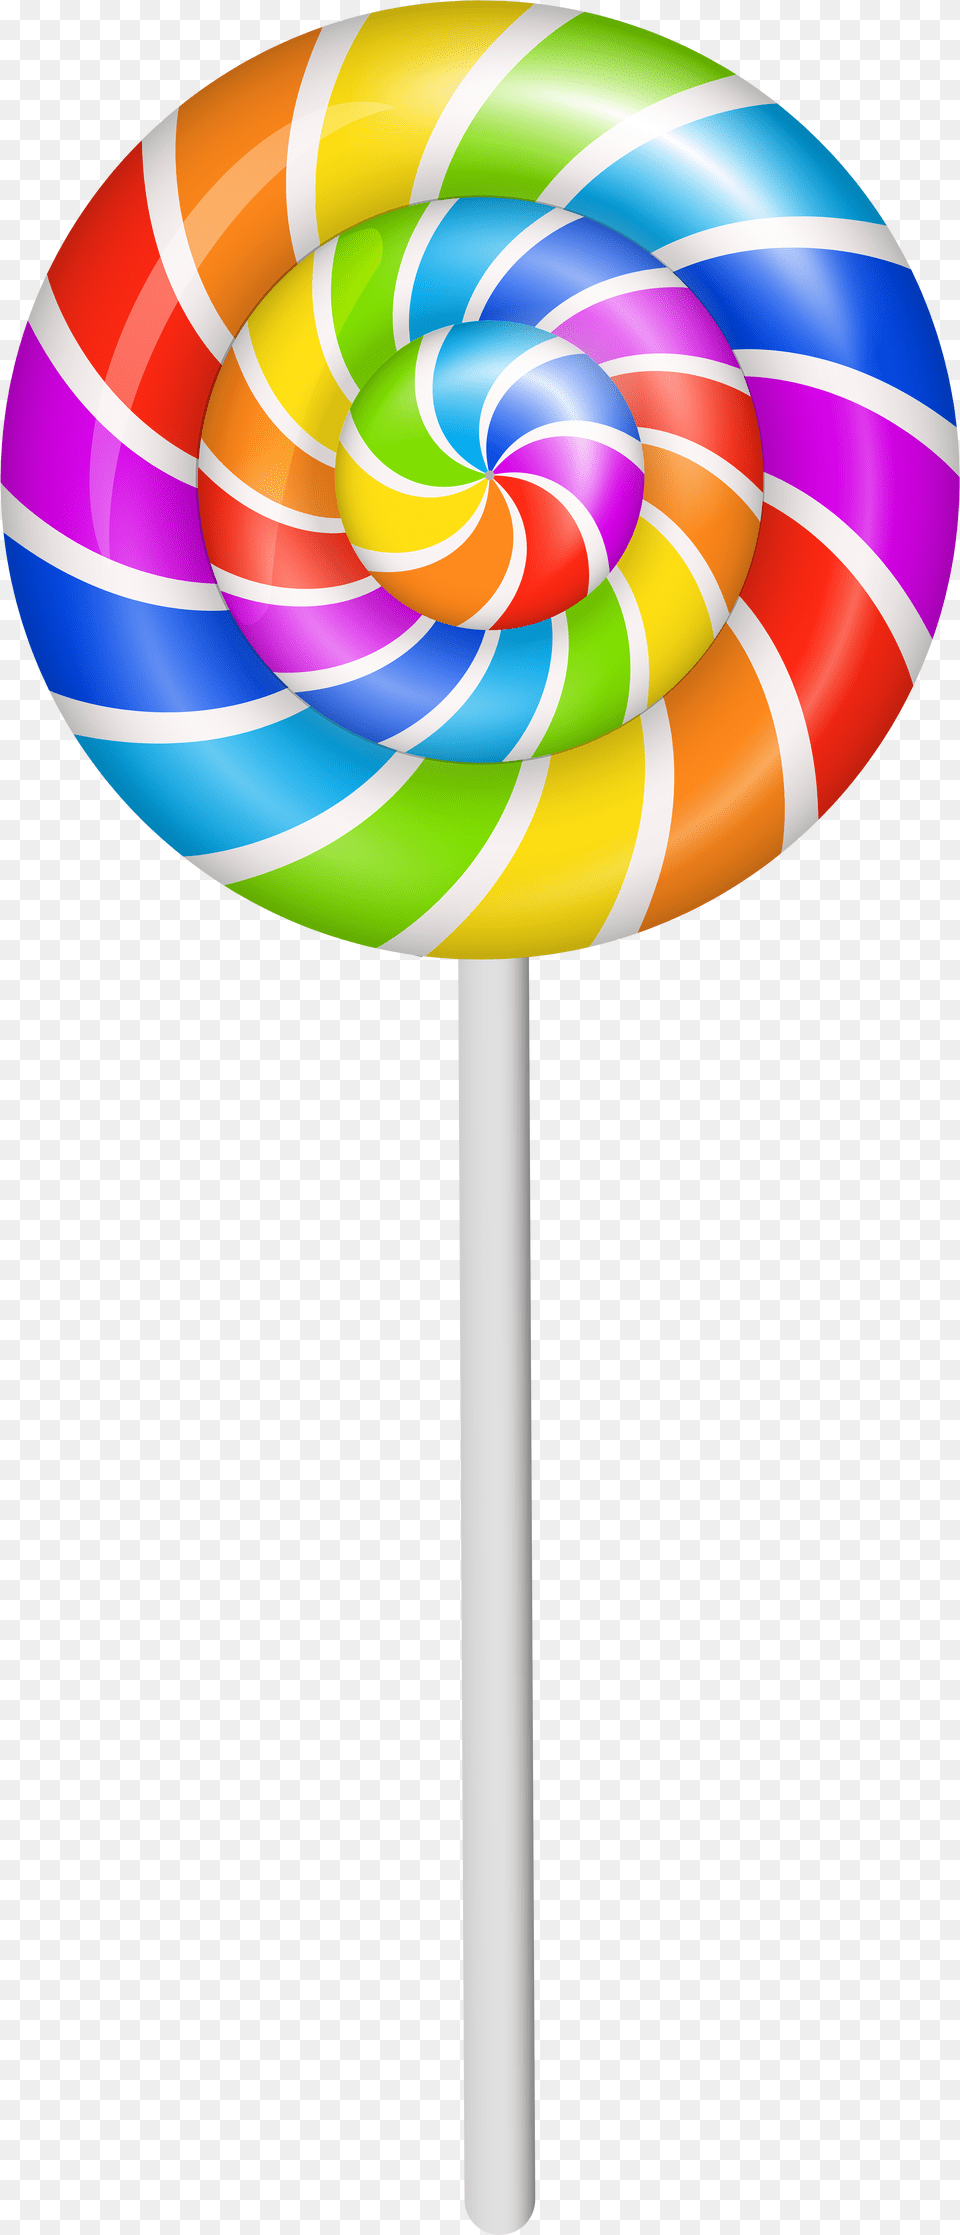 Lollipop Clipart Lollipo Frames Illustrations Images Lollipop, Candy, Food, Sweets Free Png Download